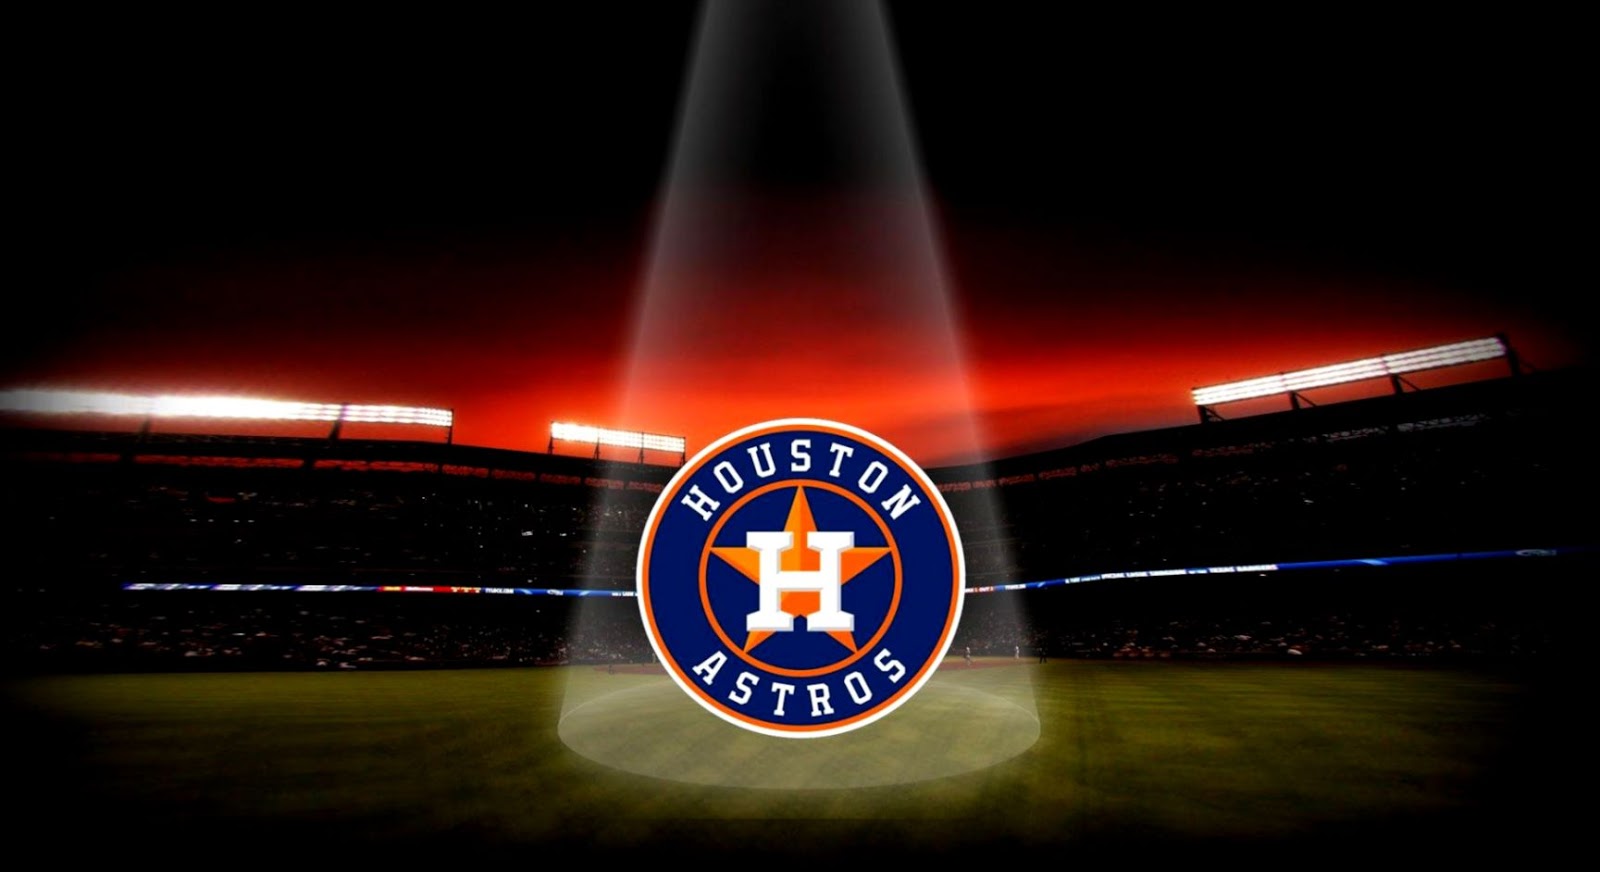 Houston Astros Wallpaper Full Hd Pictures - Houston Astros Wallpaper 2019 - HD Wallpaper 